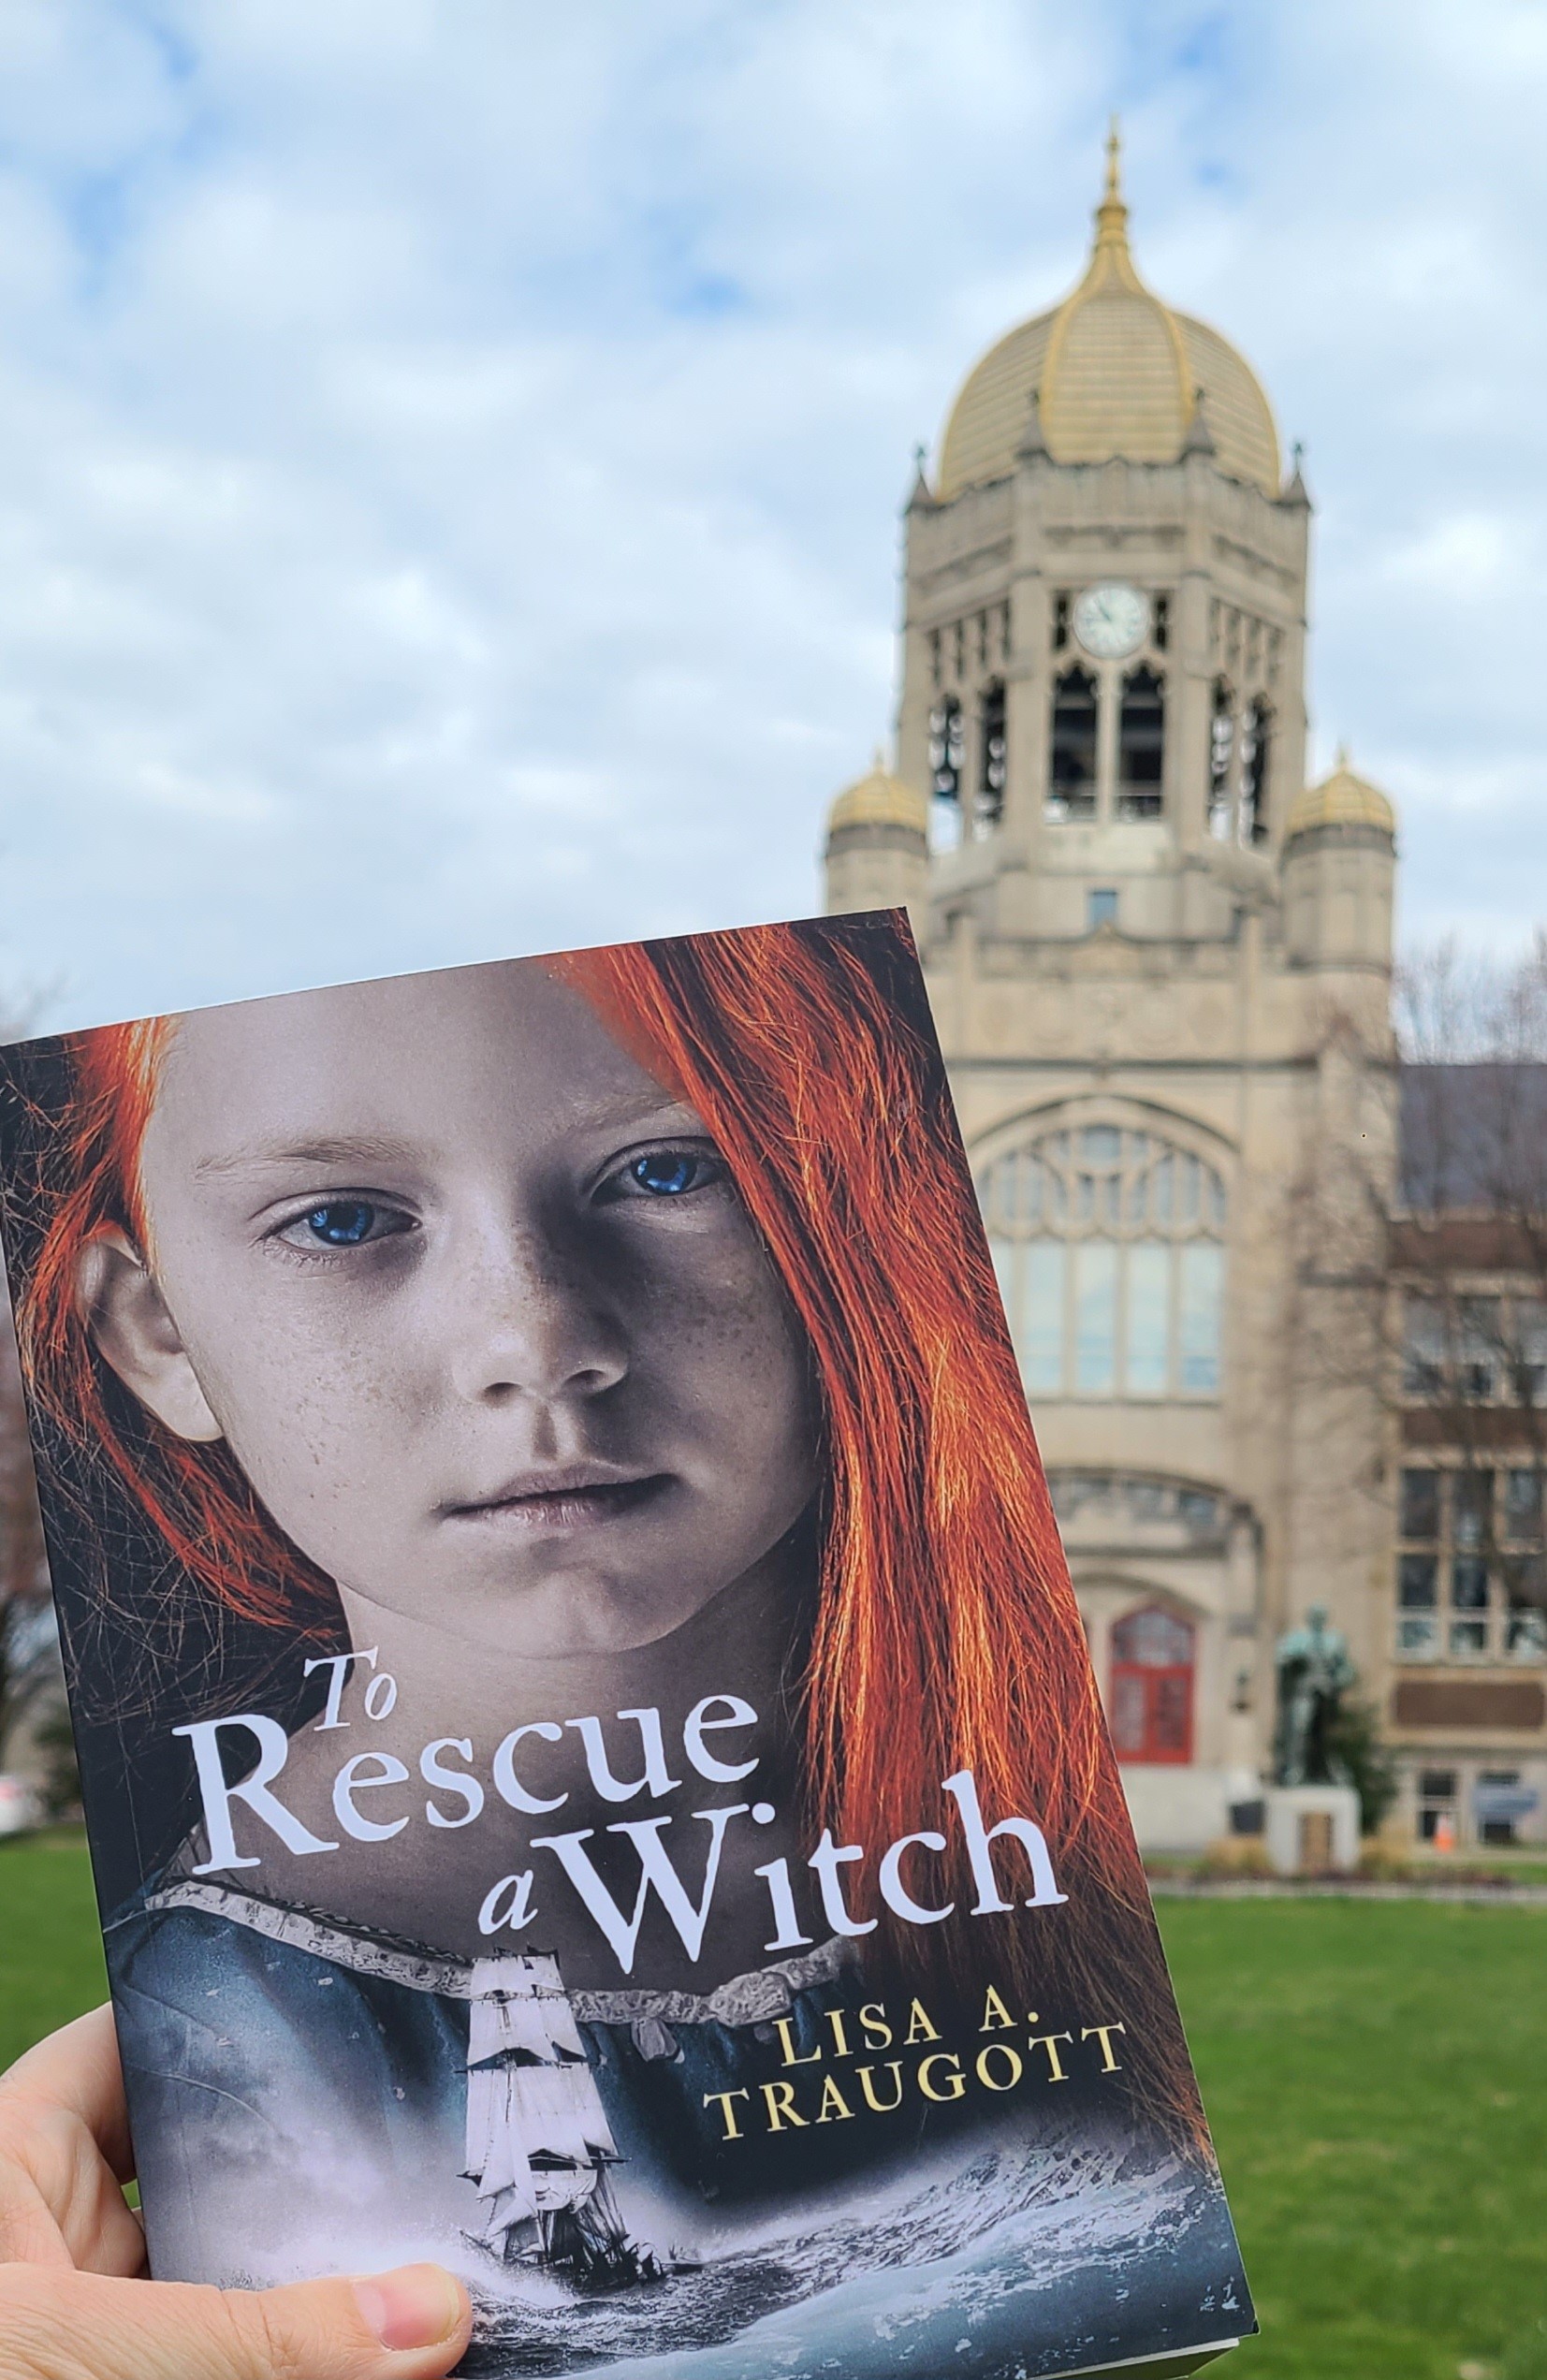 A hand holds up a book with a cover that says To Rescue a Witch in front of the Haas Bell Tower on Muhlenberg's campus